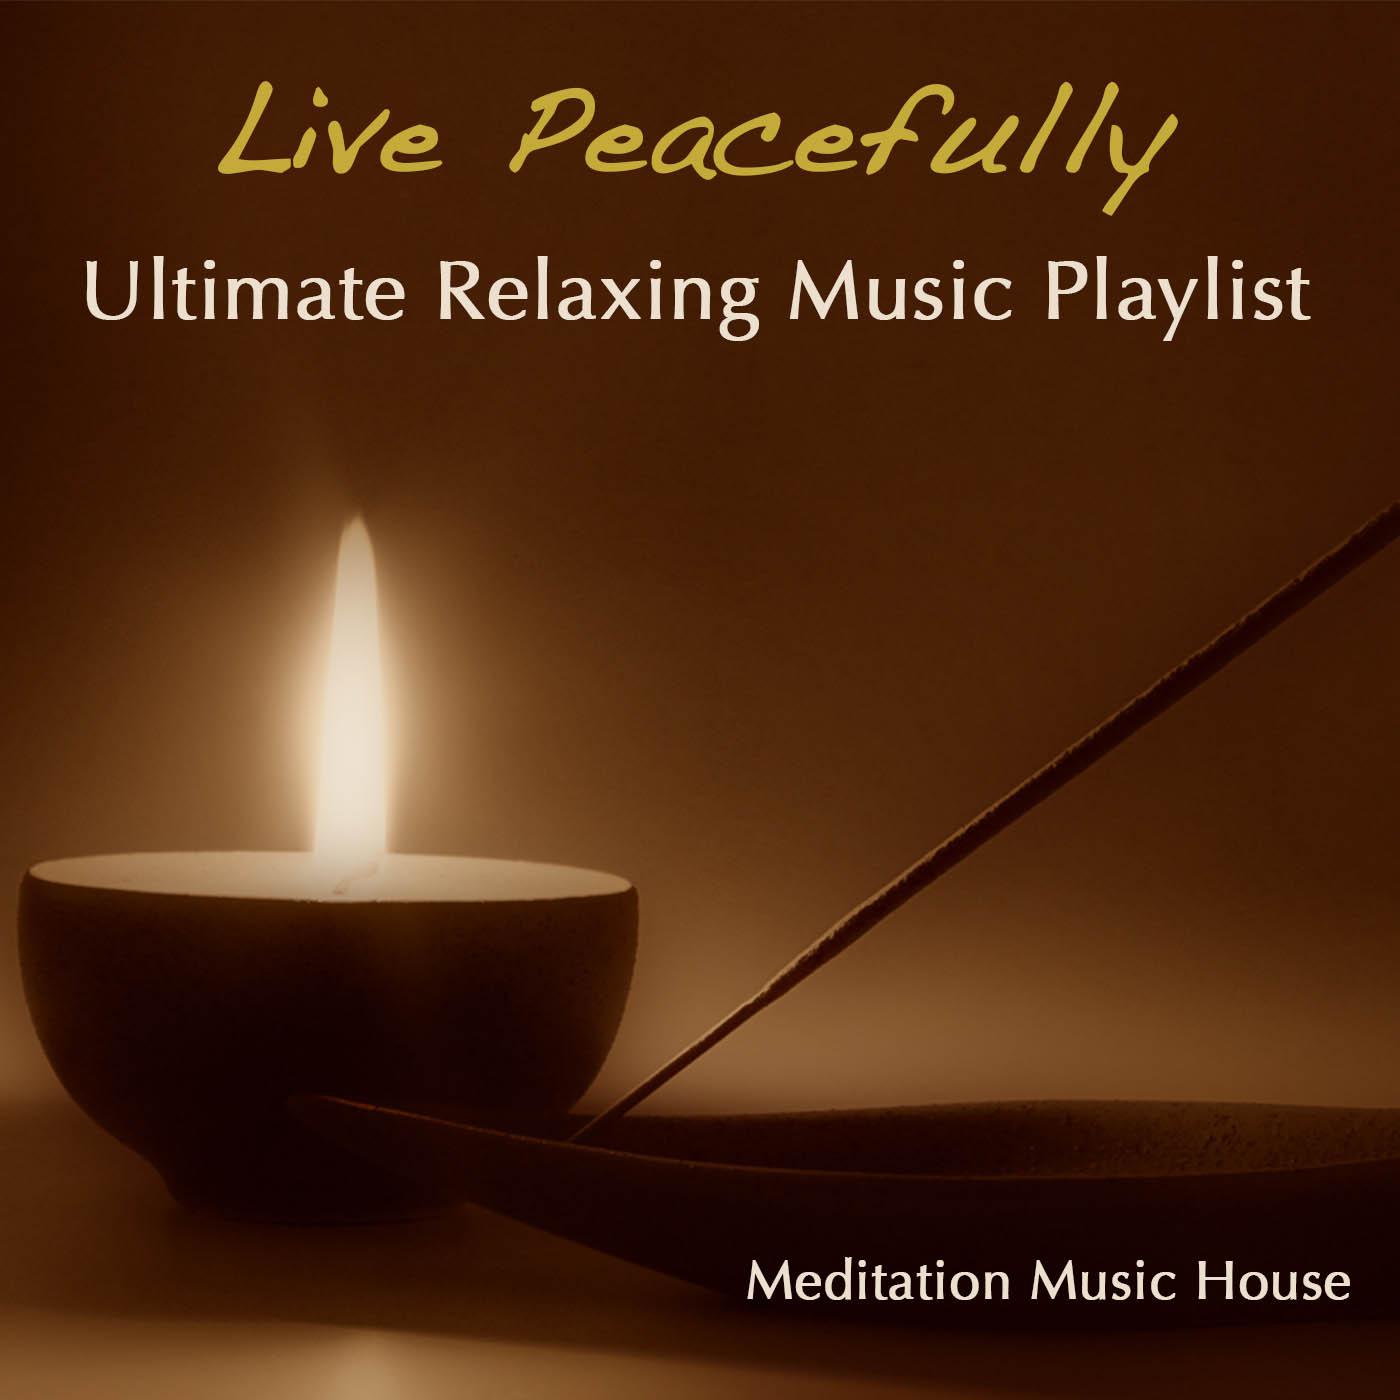 Live Peacefully - Ultimate Meditation Relaxing Music Playlist